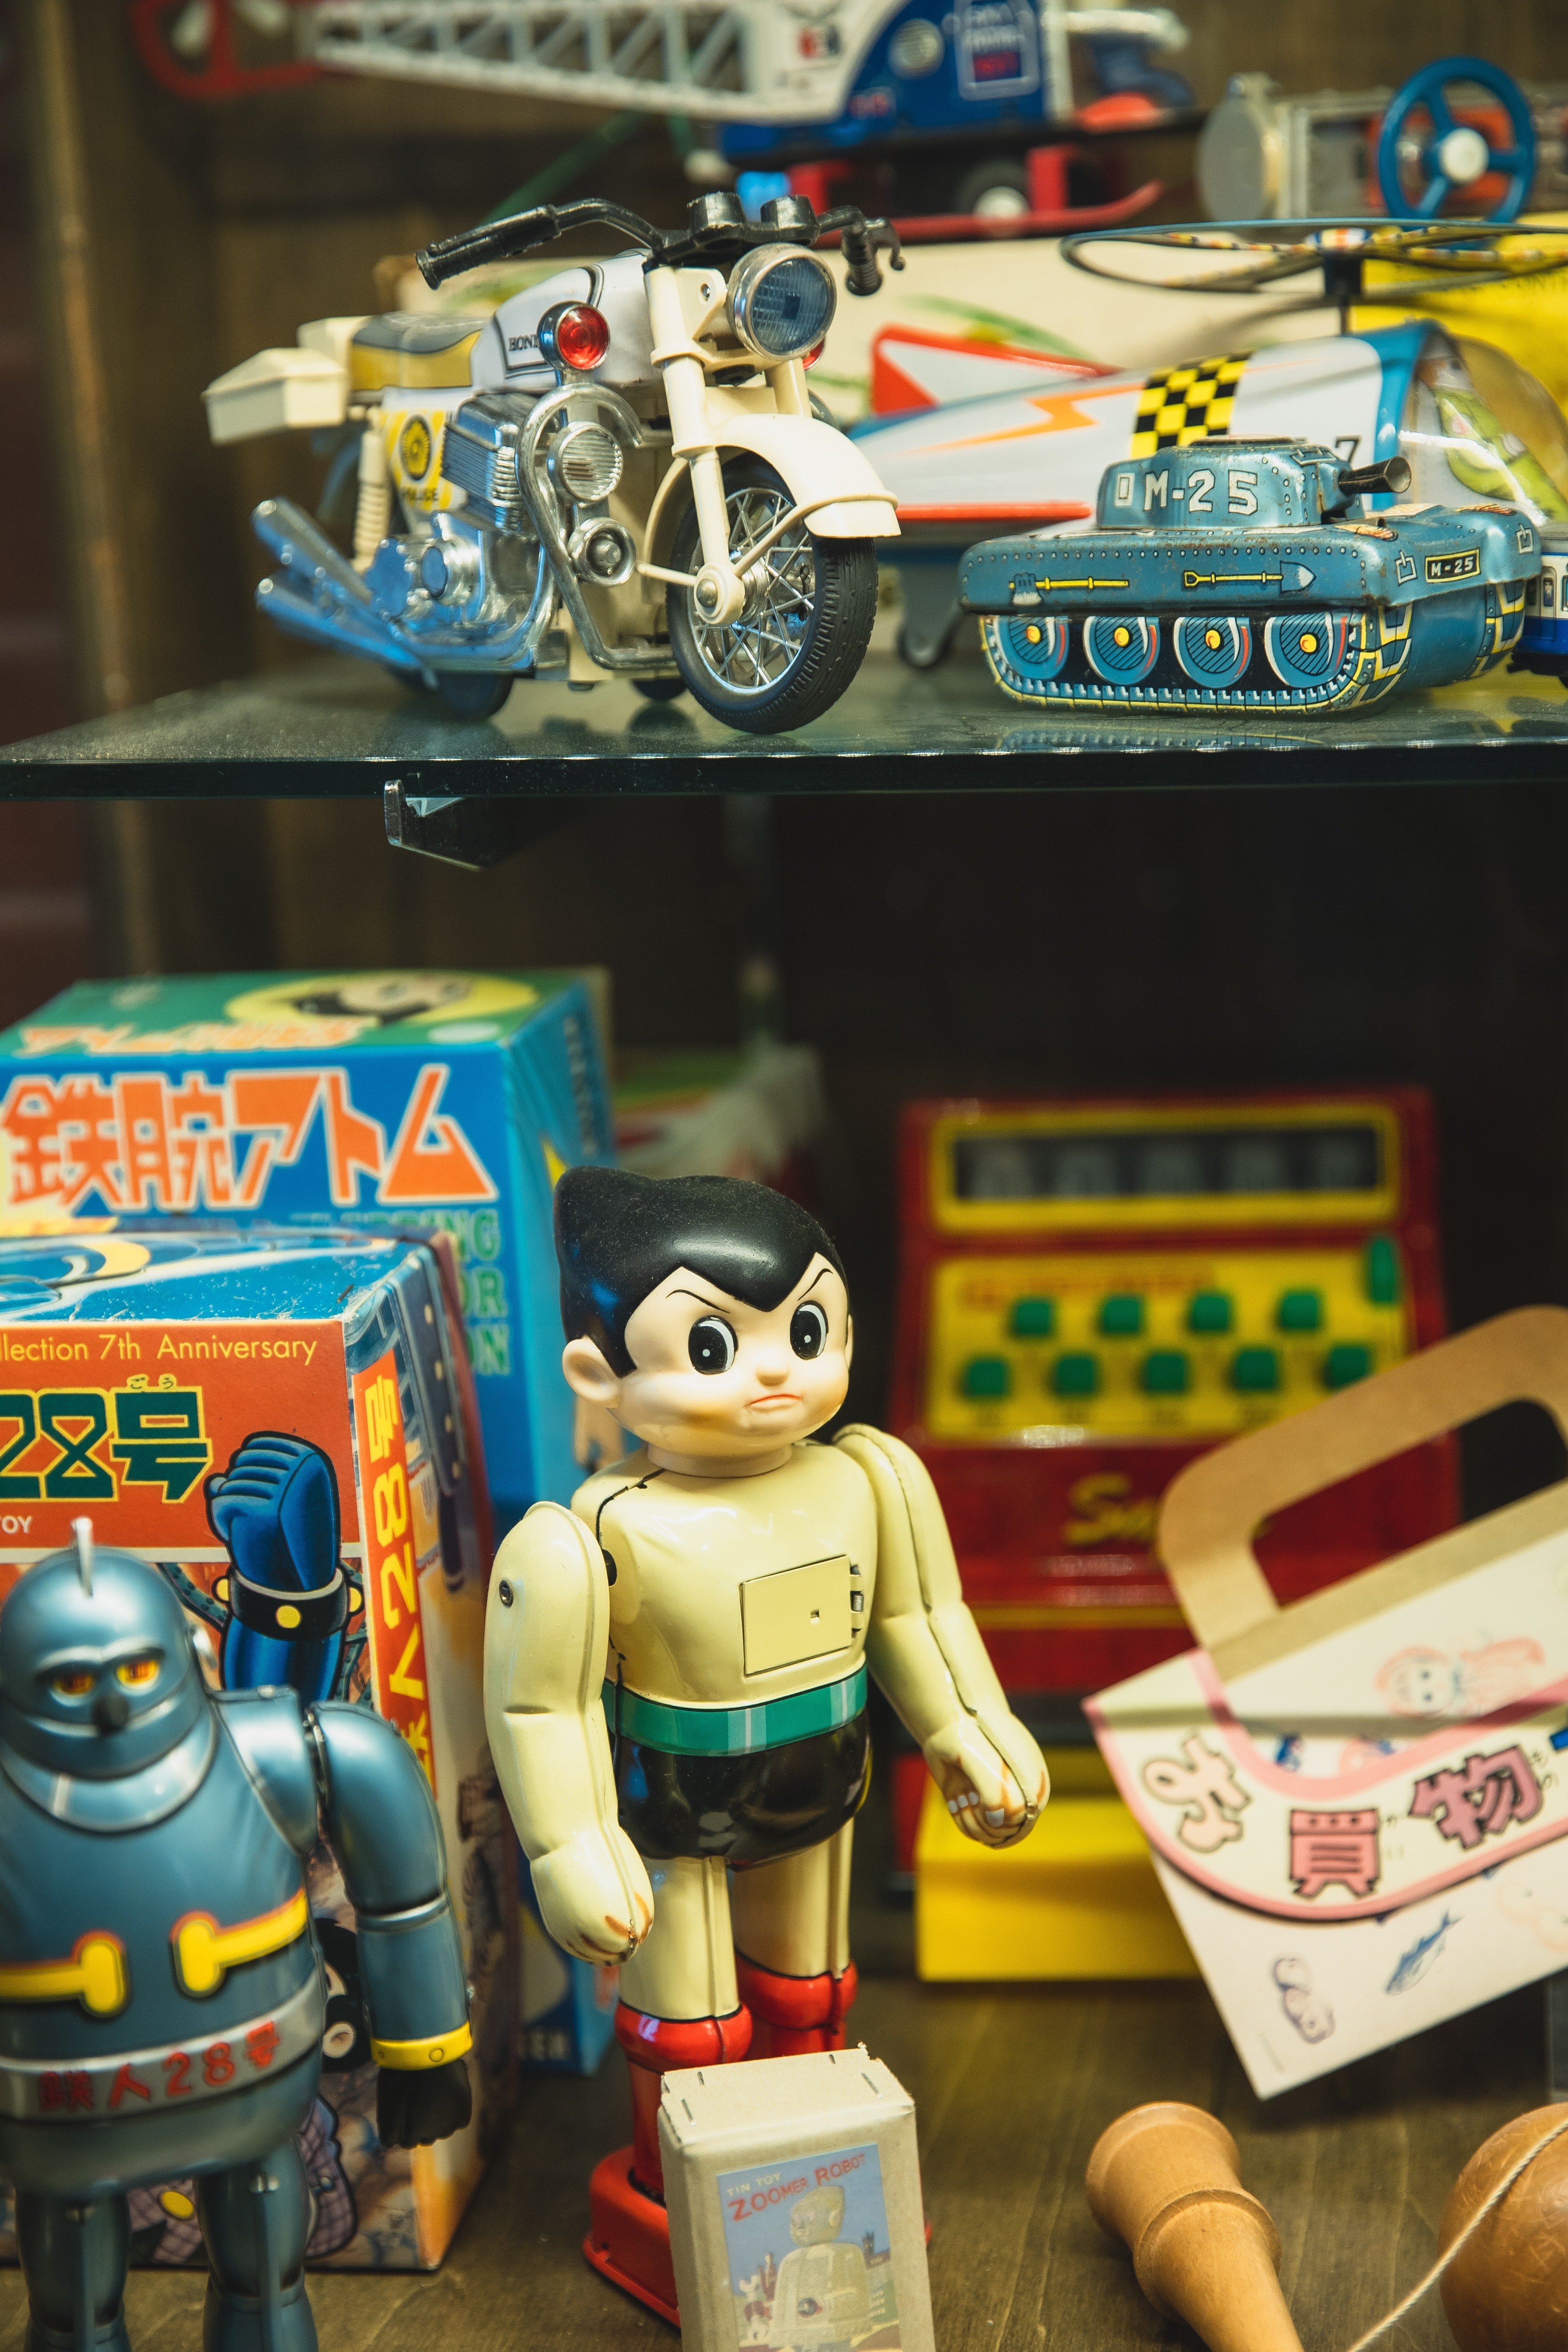 The man was selling used toys on the side of the road. | Source: Pexels